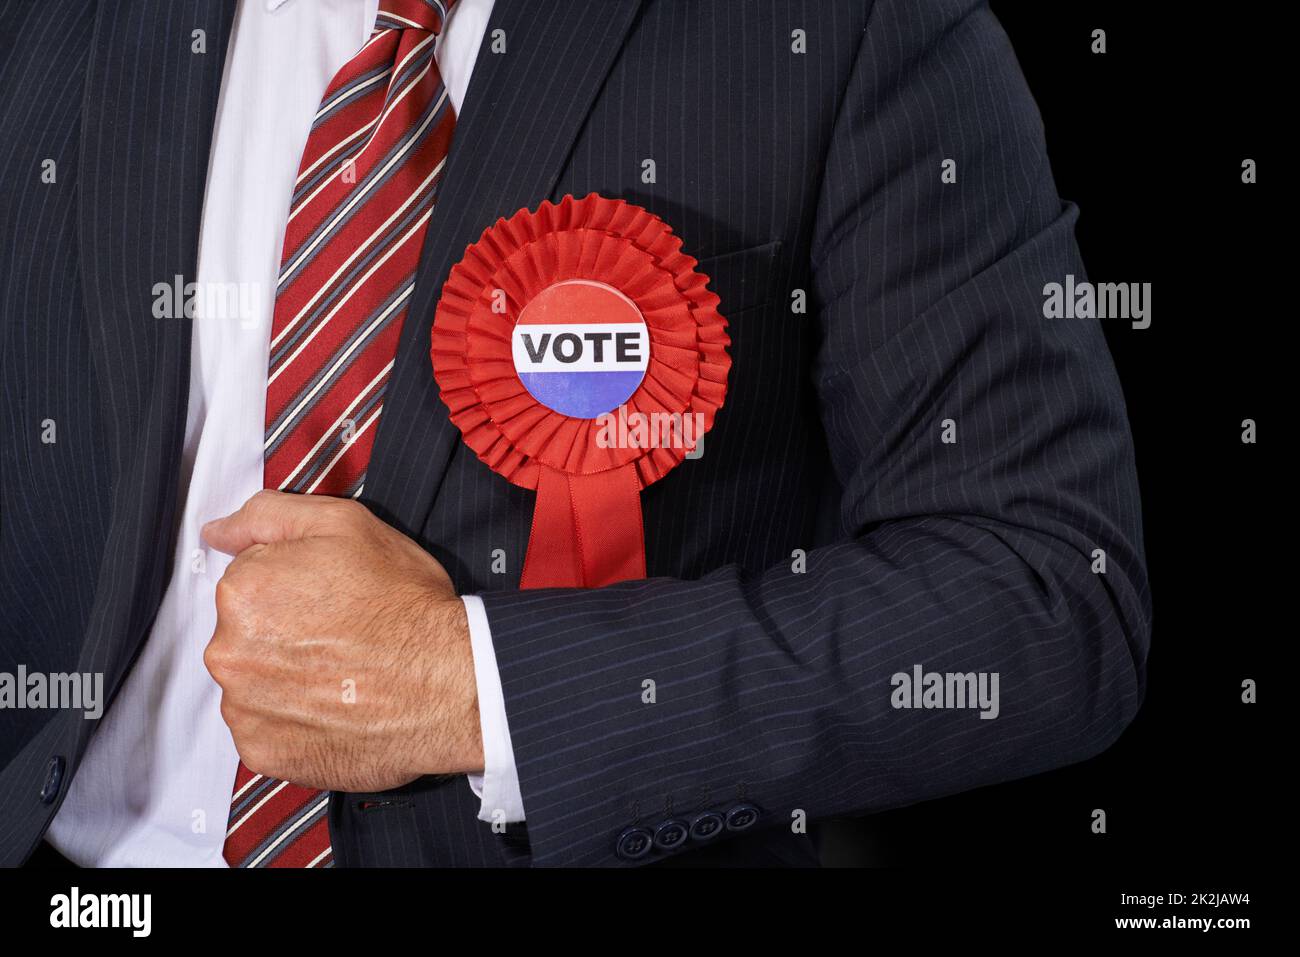 Use your votes wisely. Cropped view of a man in a suit wearing a voting ribbon ona black background. Stock Photo